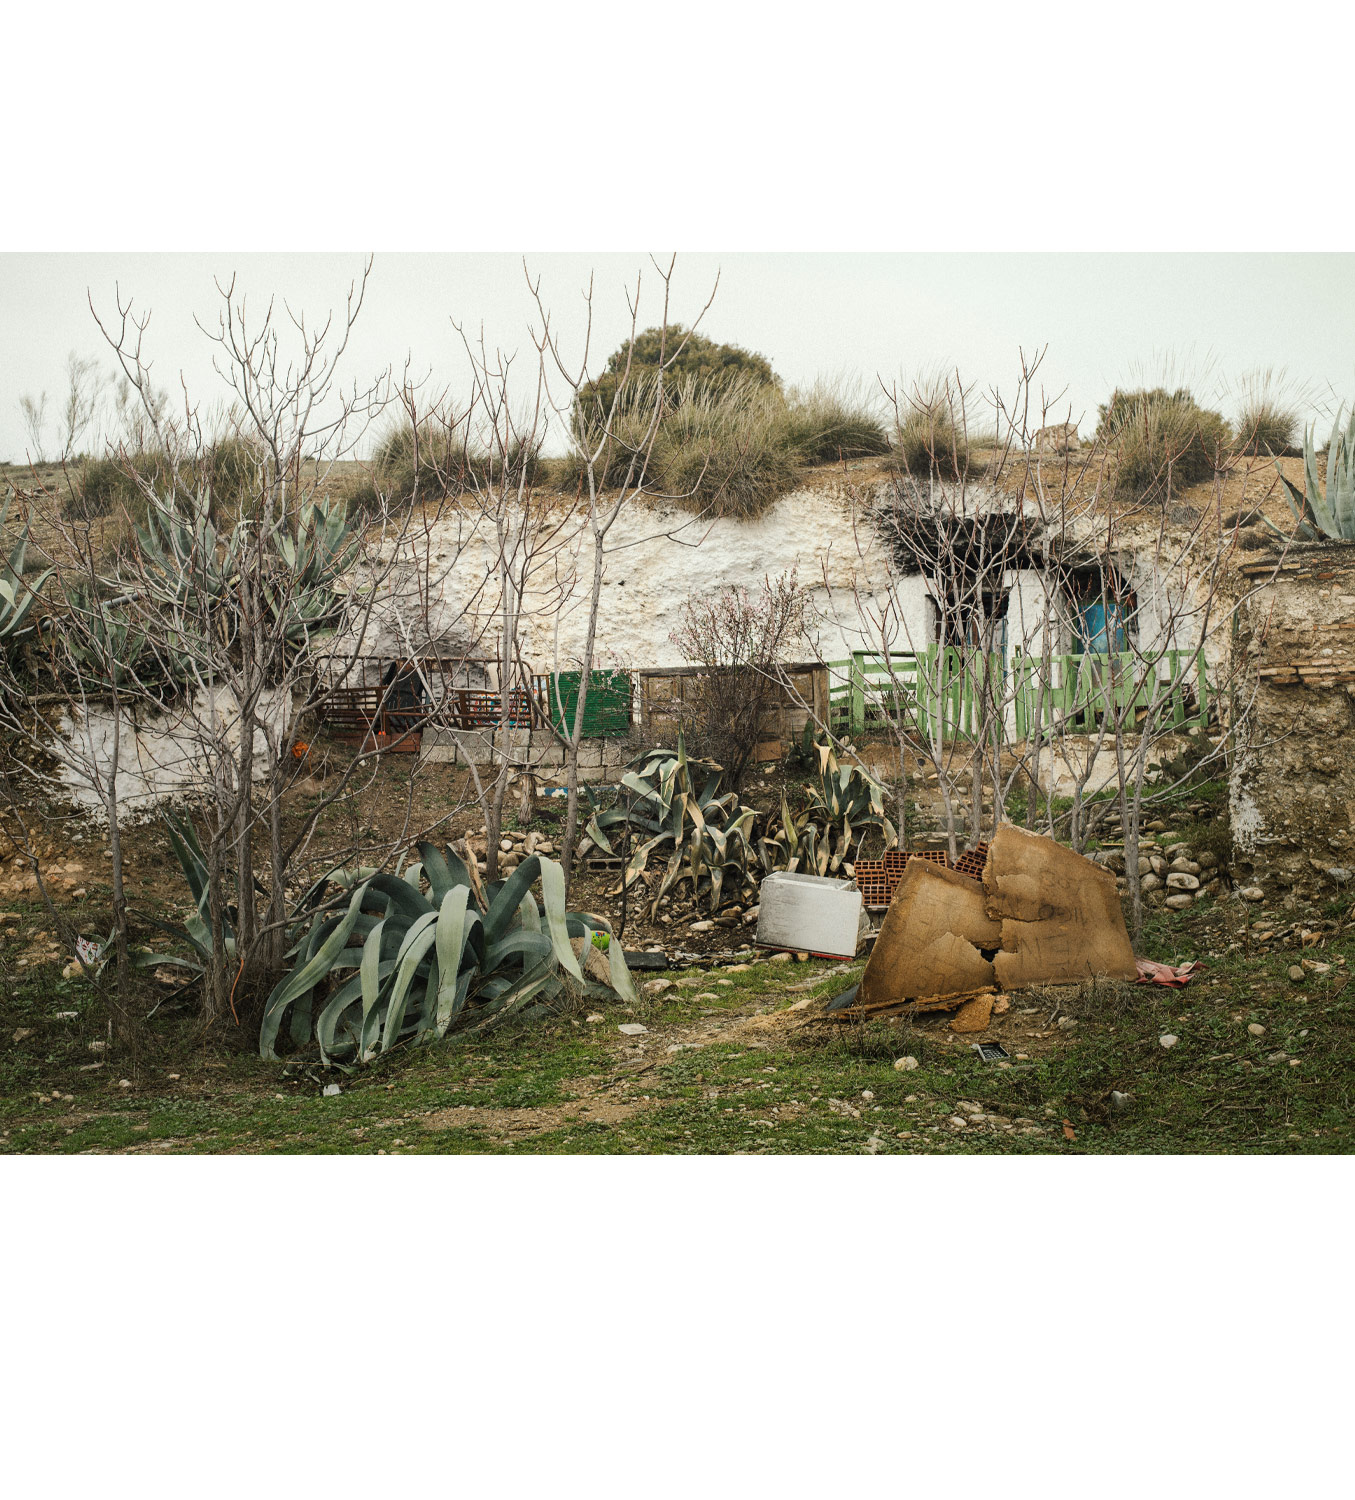 grete tvarkunaite documentary photography project not one dimensional society andalusia beneficio community granada caves off grid travel europe